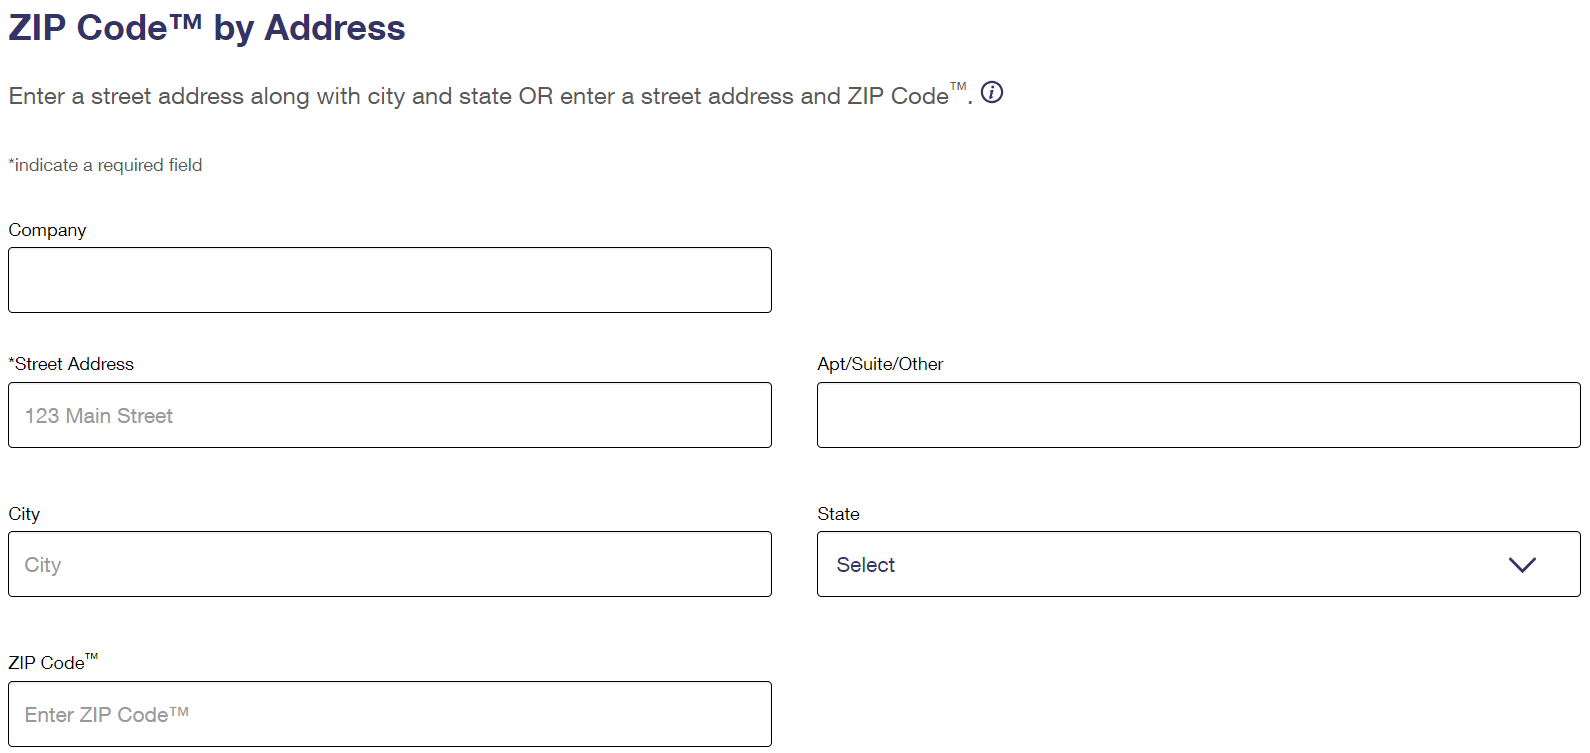 screenshot of datafields required by USPS to look up address, available at www.usps.com